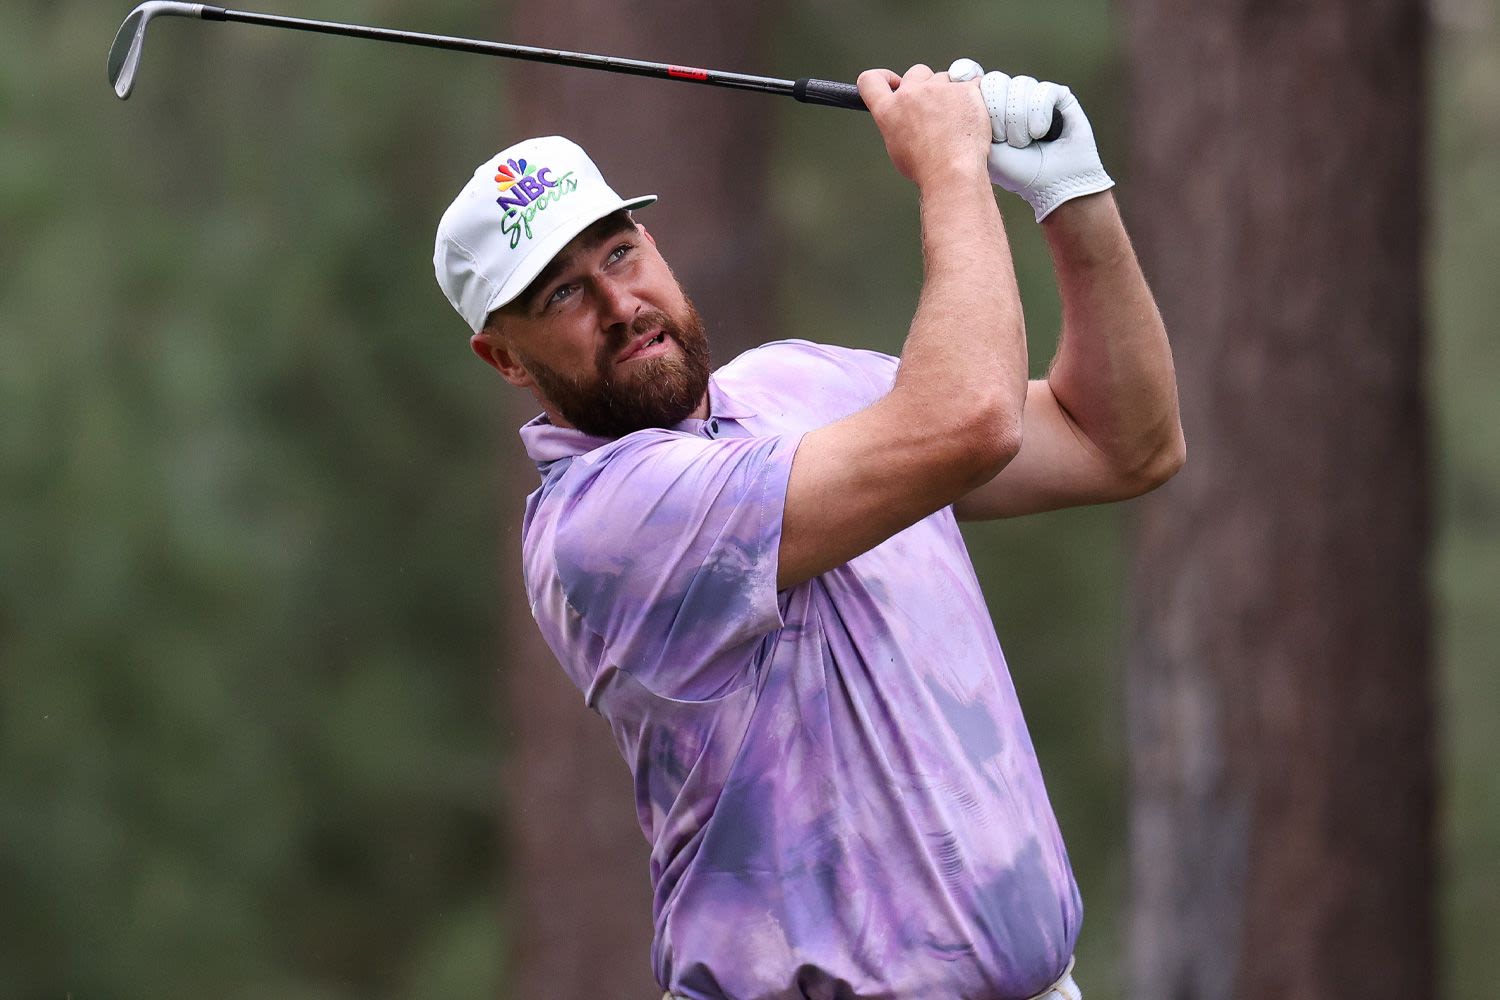 Travis Kelce Sings Taylor Swift’s ‘Cruel Summer’ Hit on Golf Course at Celebrity Charity Tournament